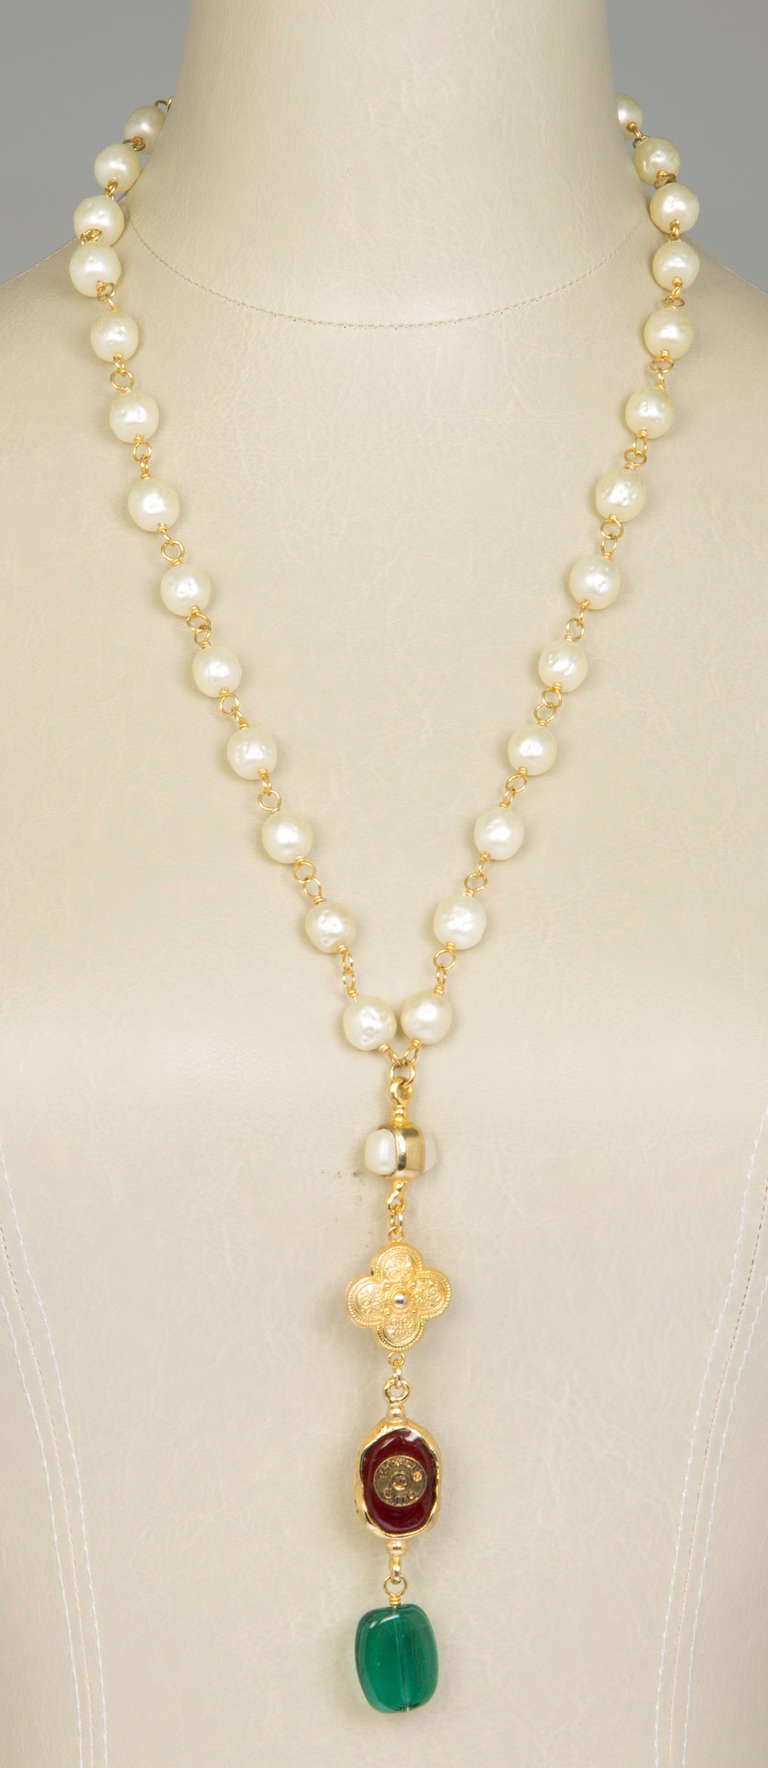 Chanel Faux Pearl and Gripoix Glass Pendant Necklace In Excellent Condition For Sale In Chicago, IL